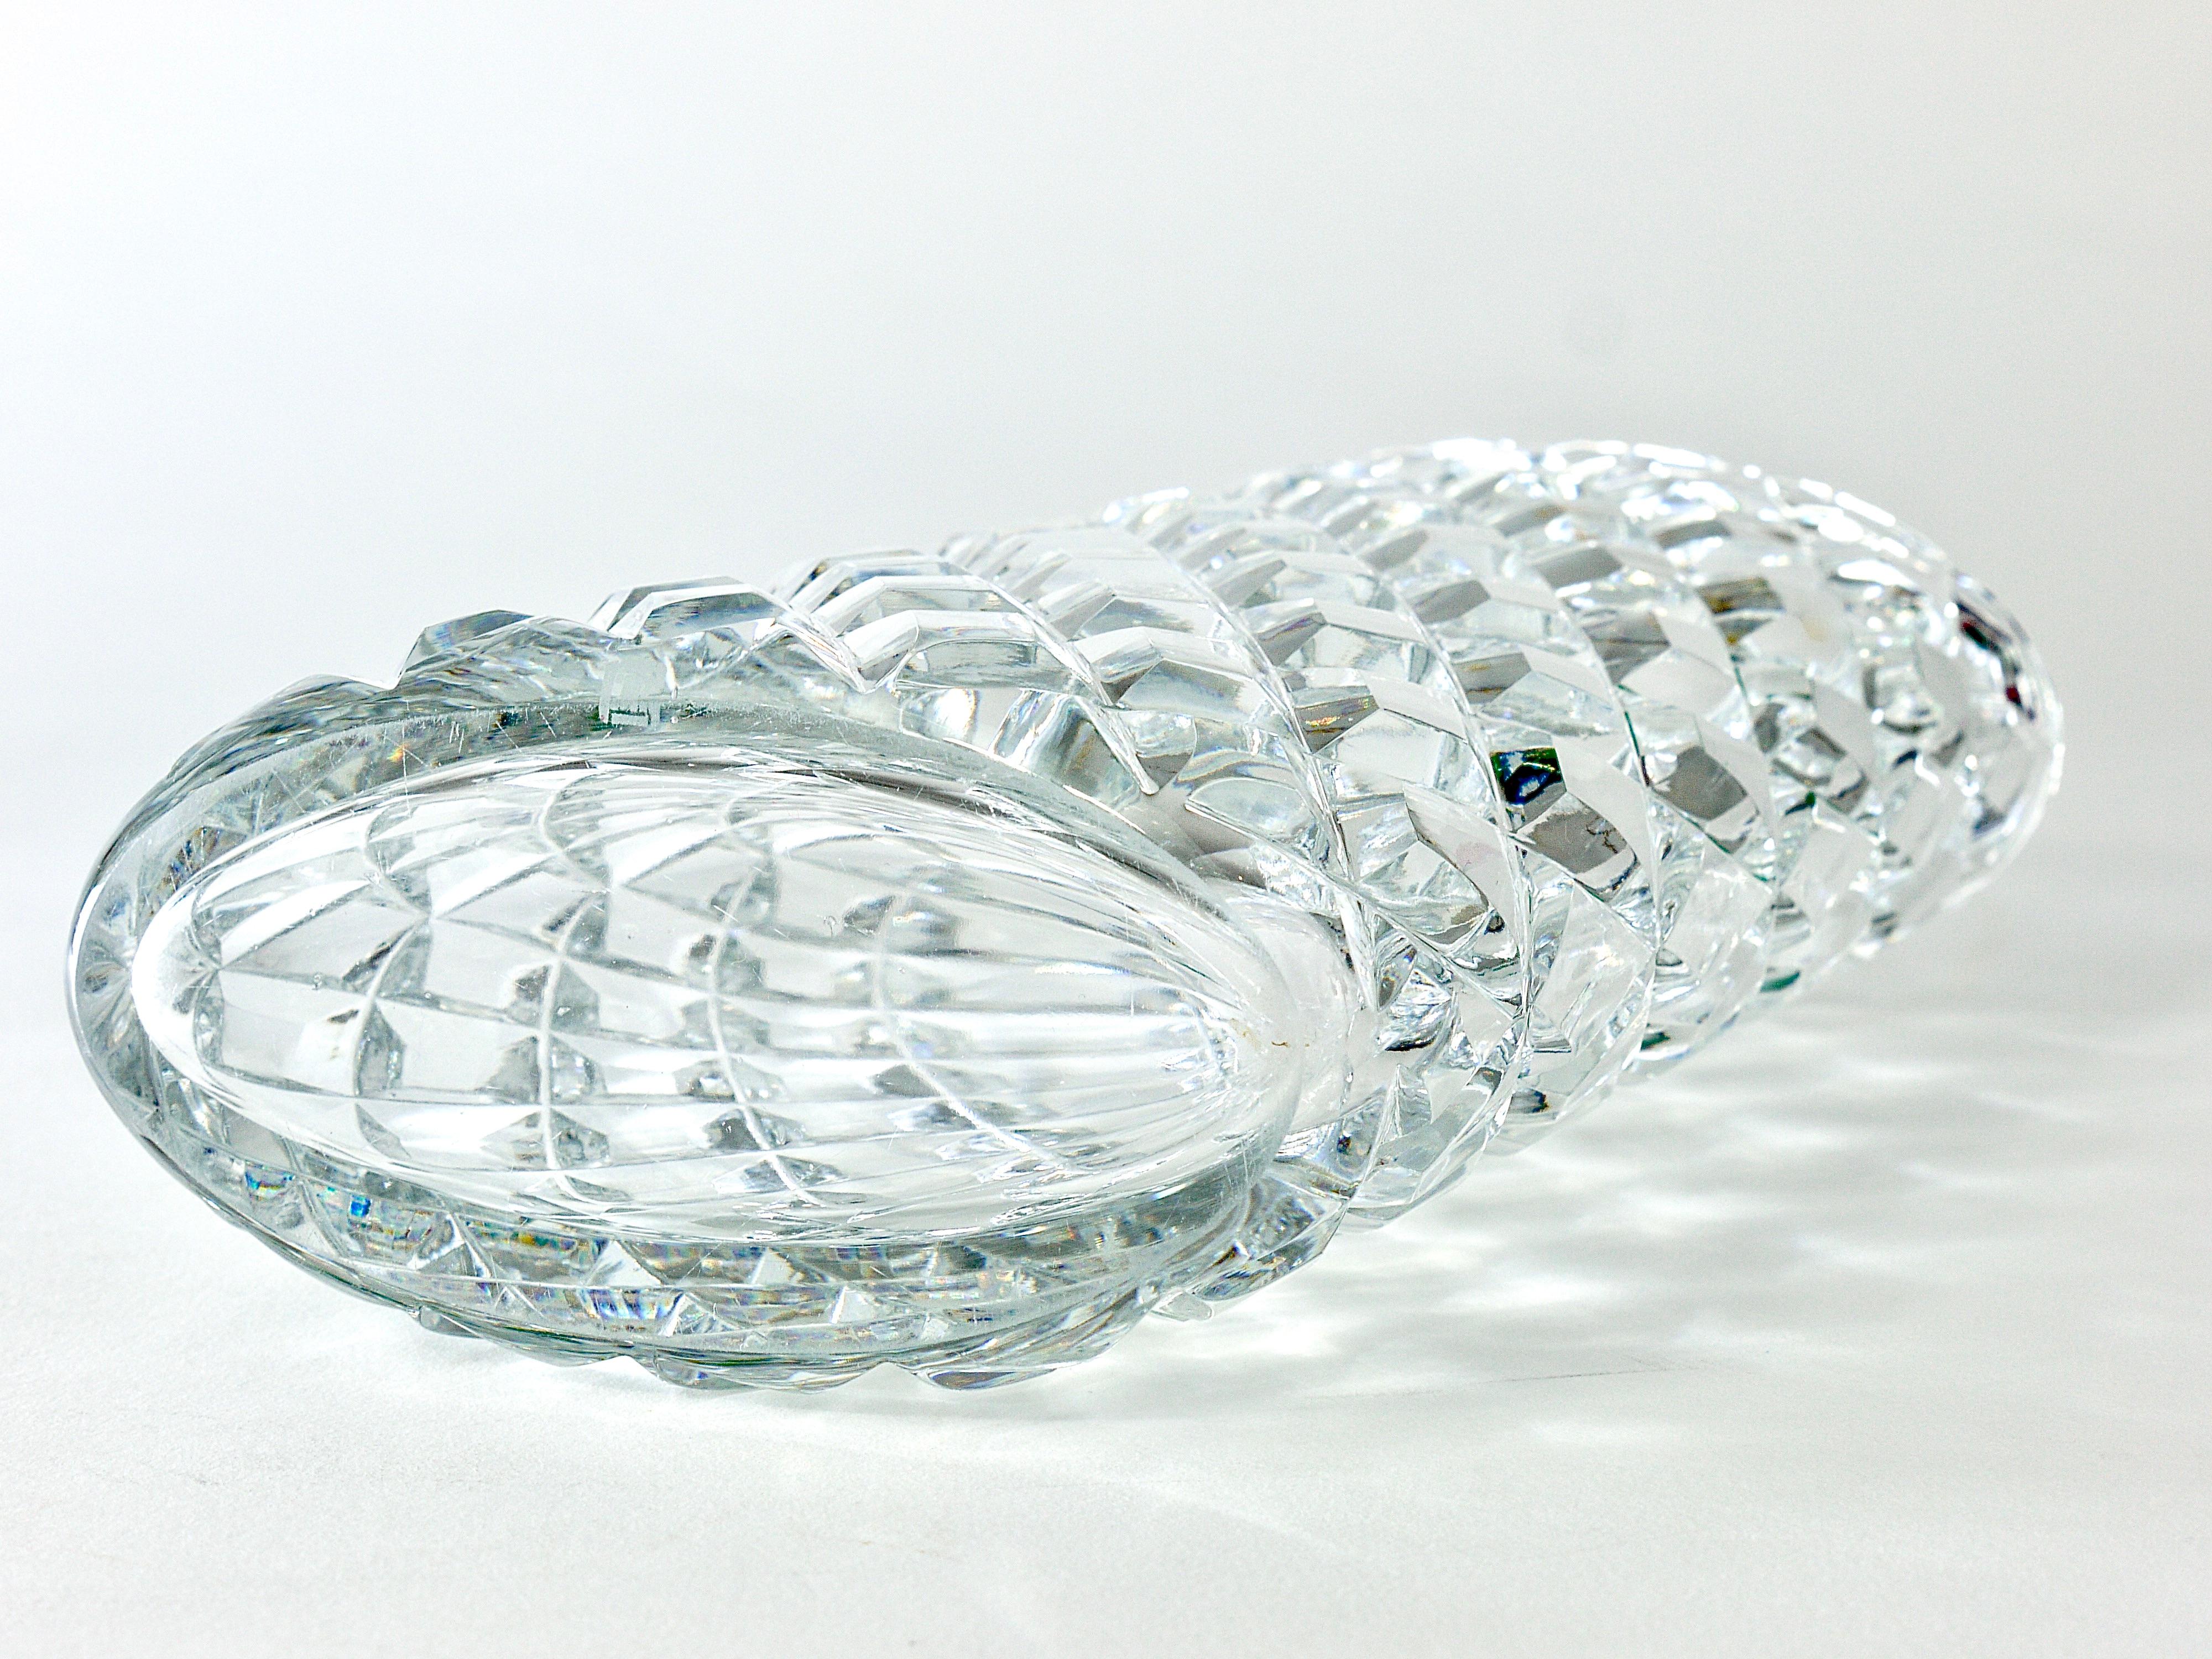 Sparkling Facetted Crystal Glass Vase by Claus Josef Riedel, Austria, 1970s For Sale 3